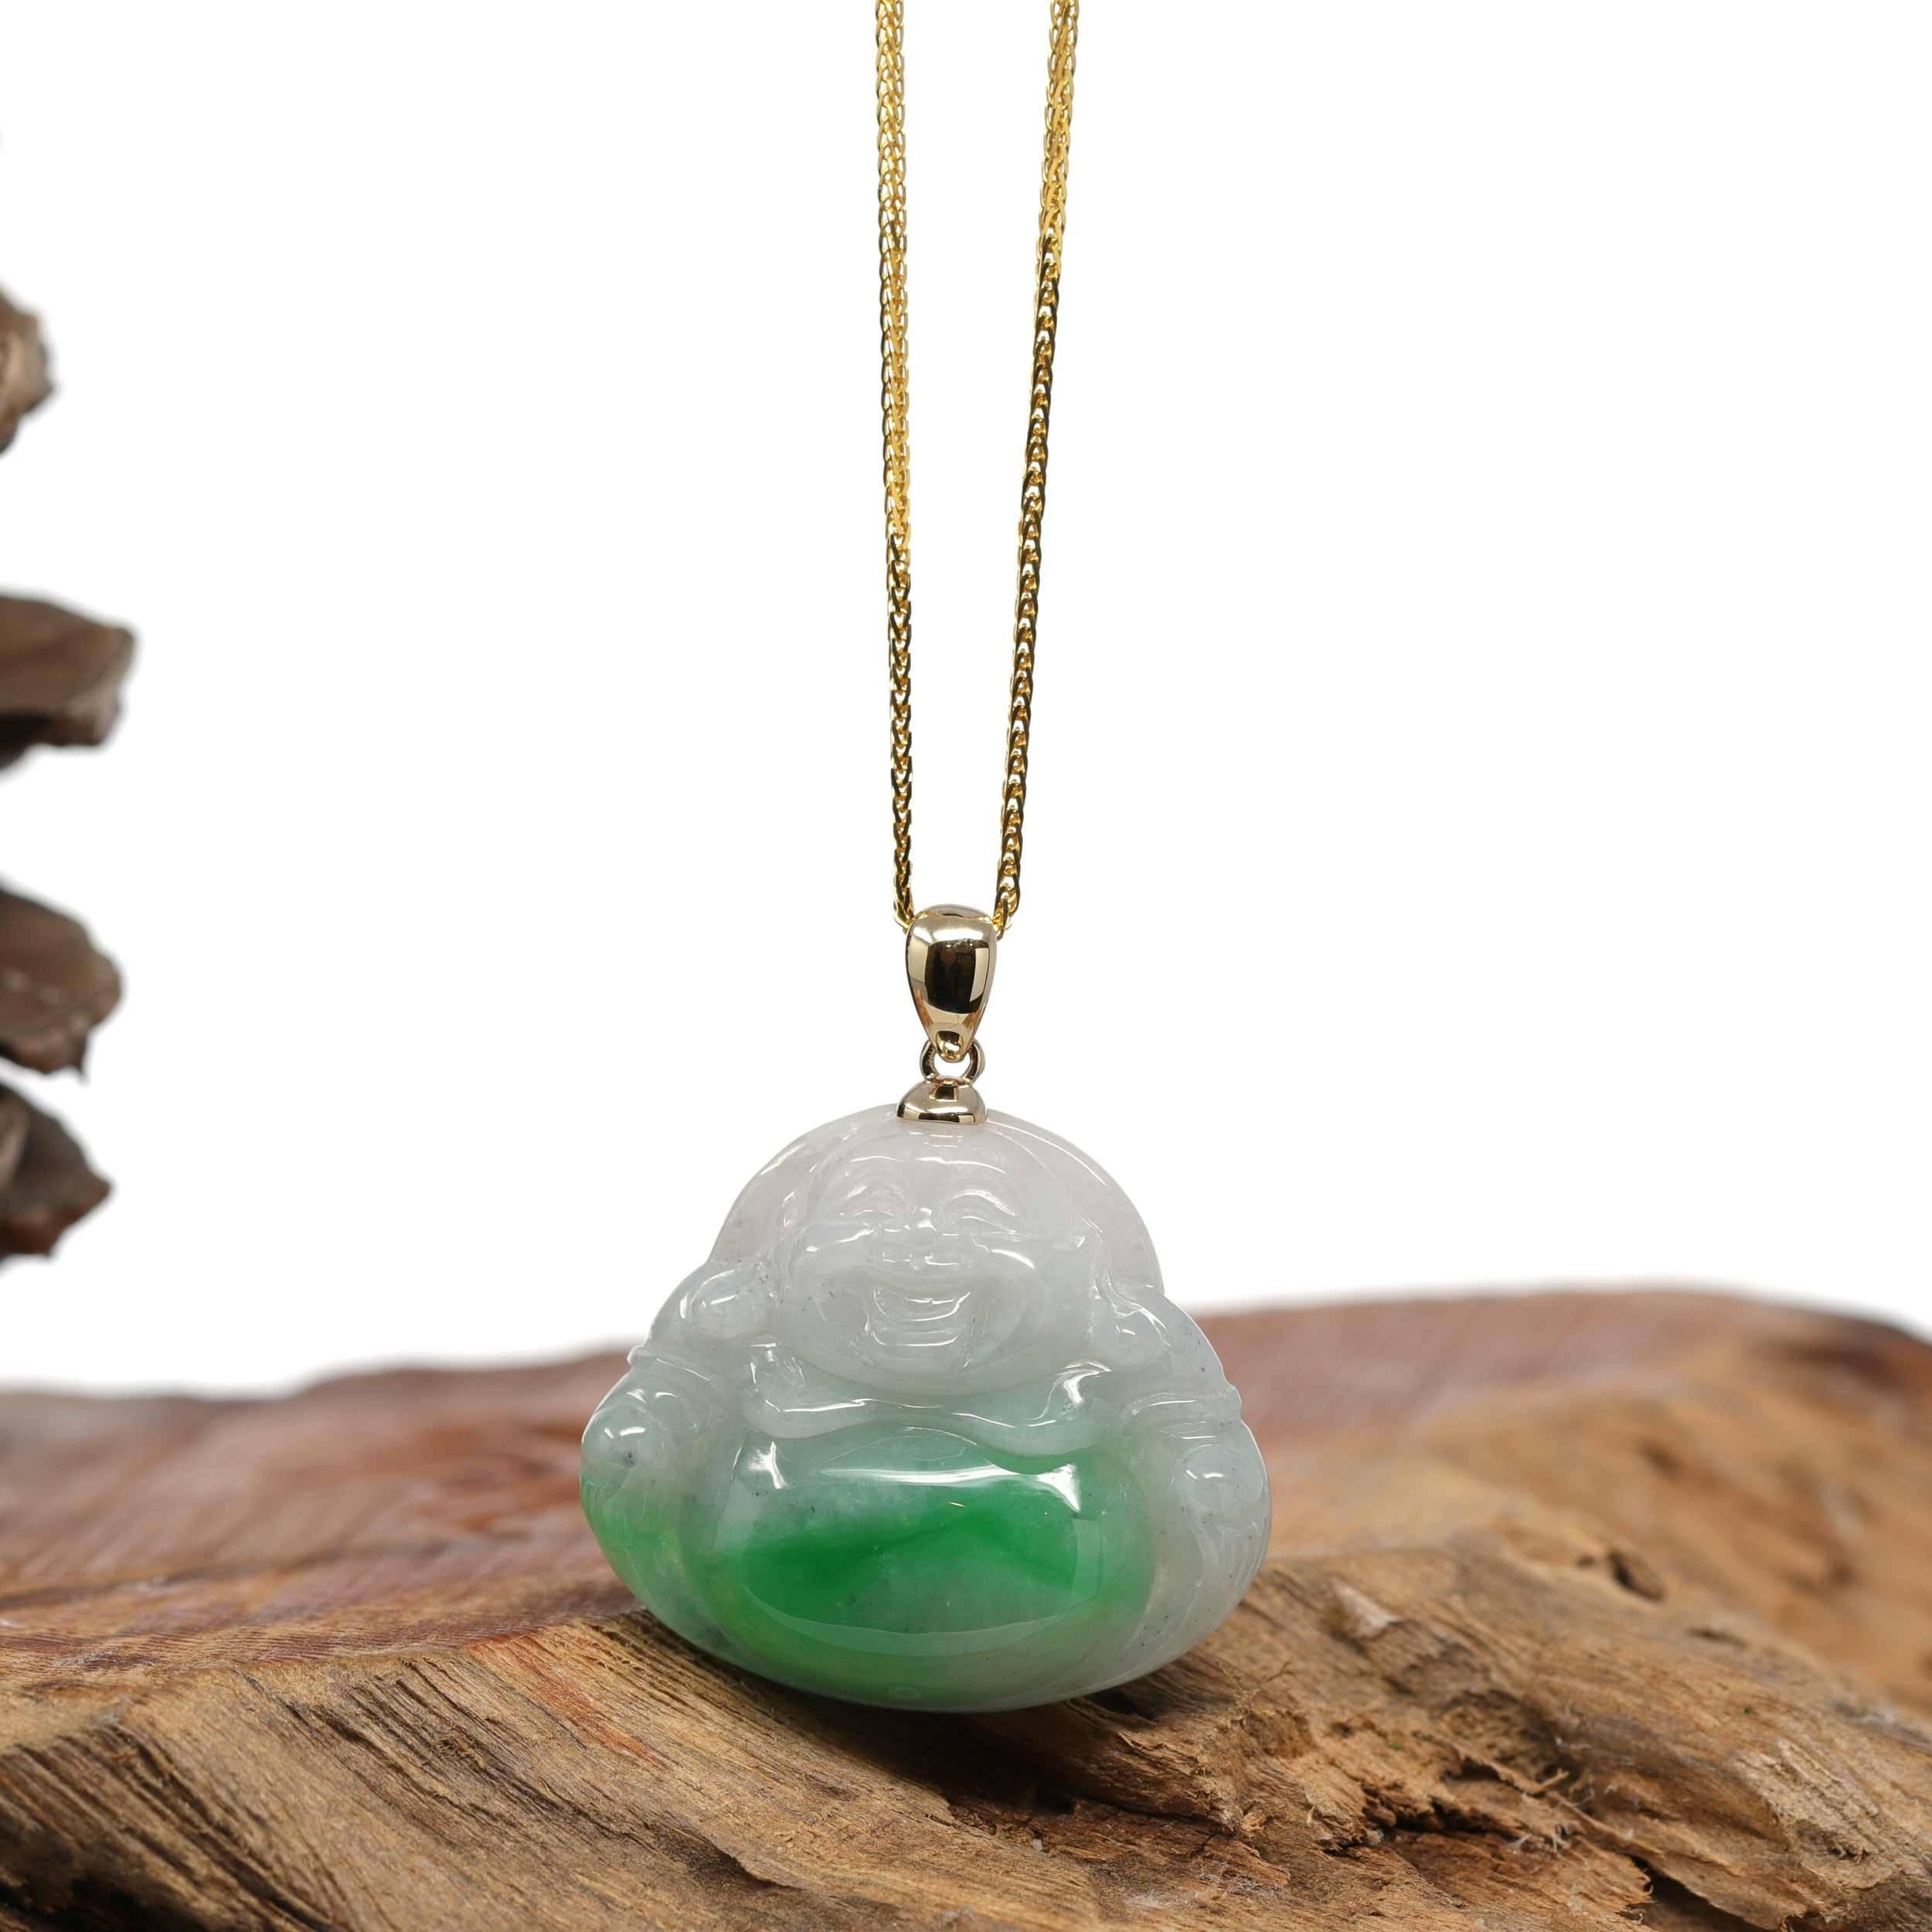 "Laughing Buddha" Rich Green Jadeite Jade Necklace with 14k Yellow Gold Bail For Sale